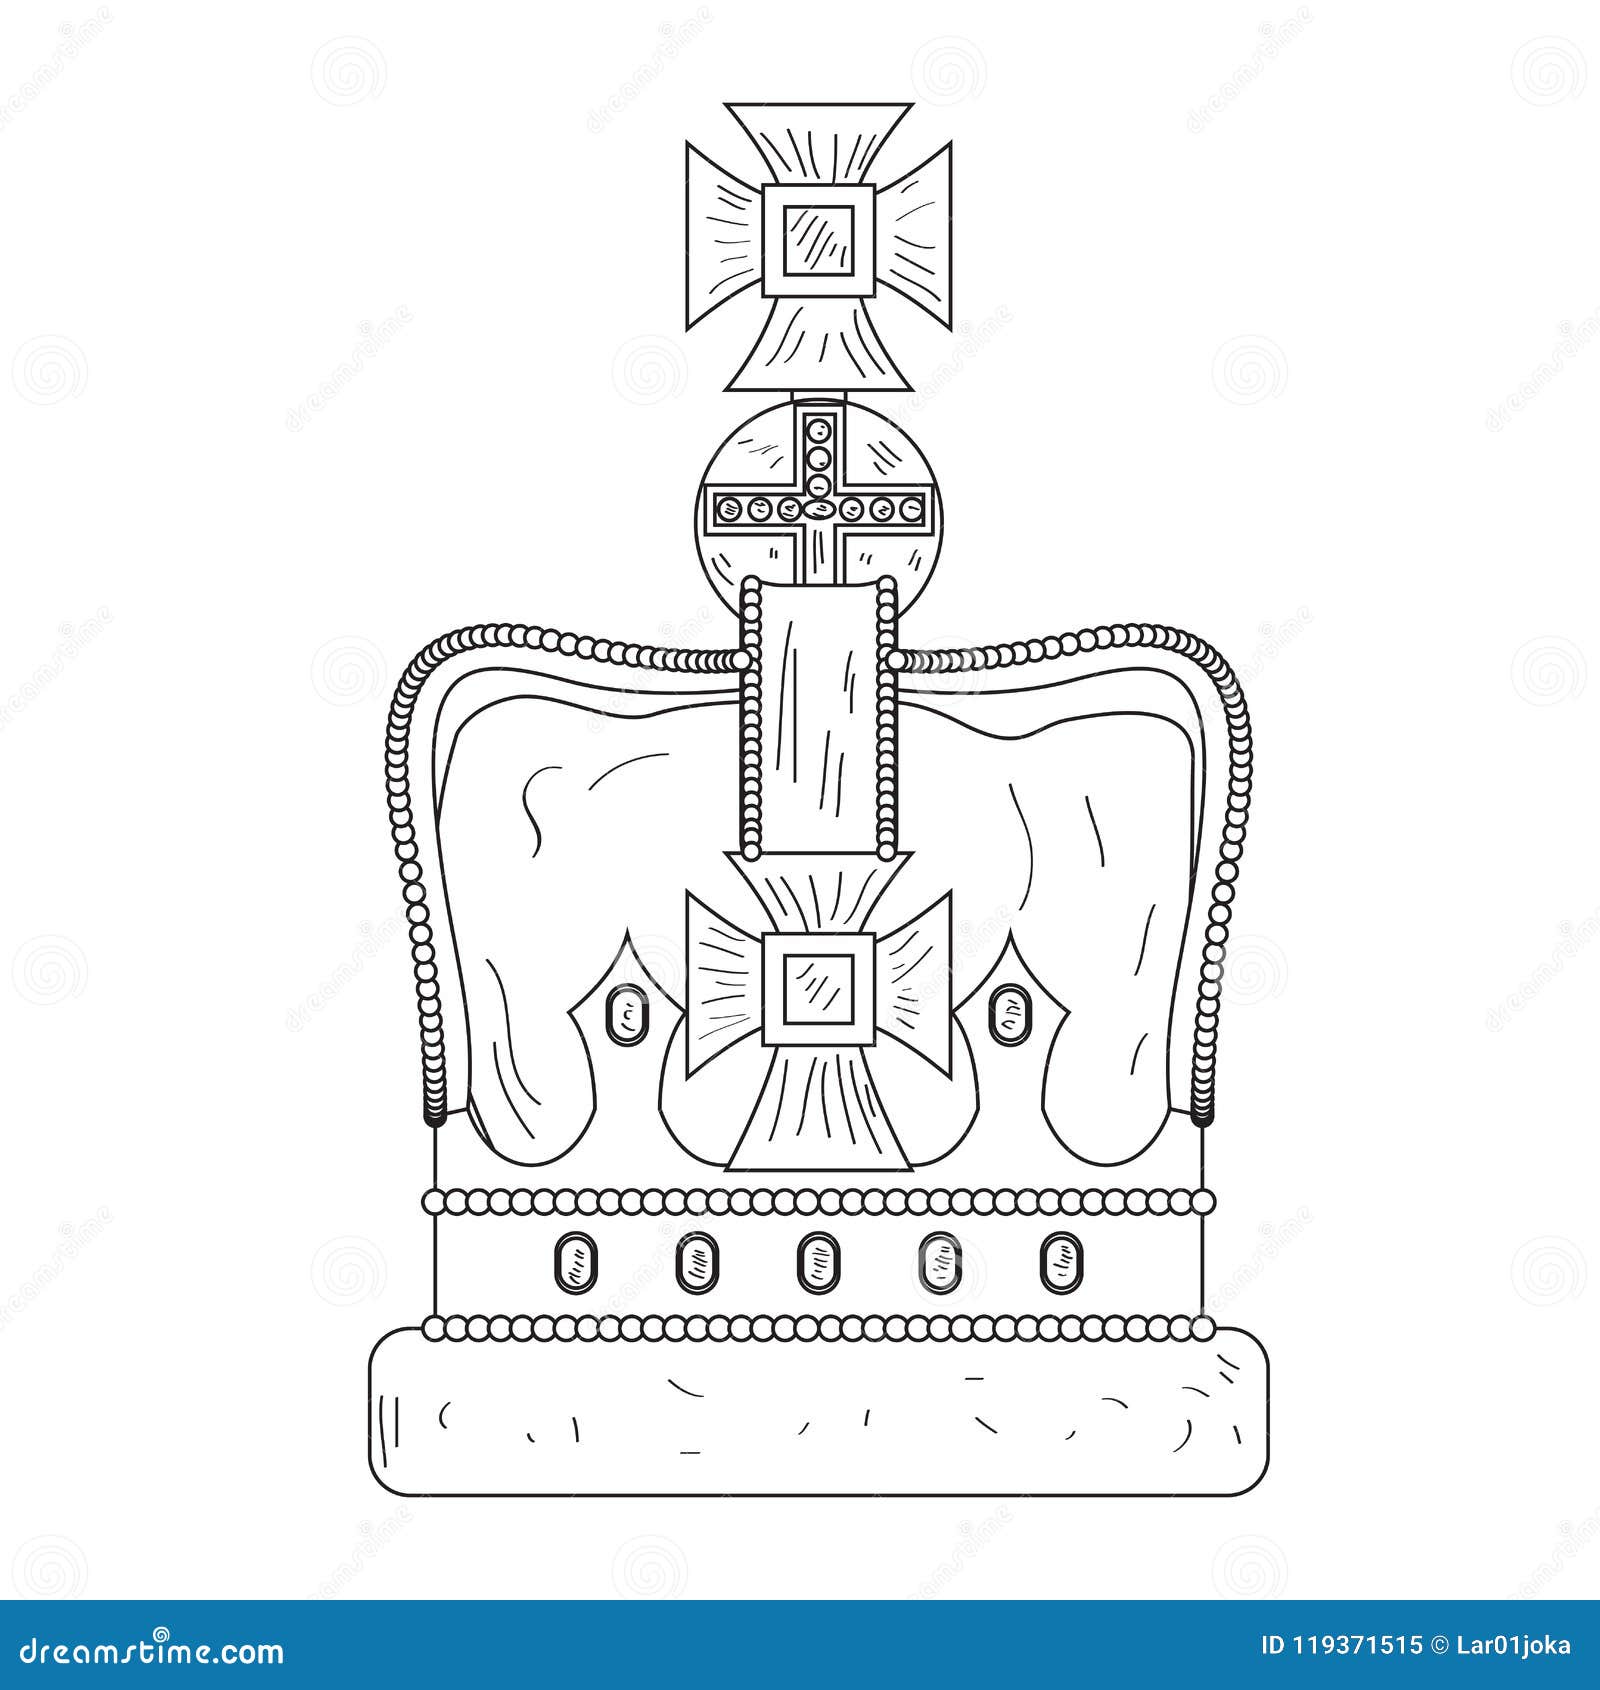 Sketch of a royal crown stock vector. Illustration of medieval - 119371515